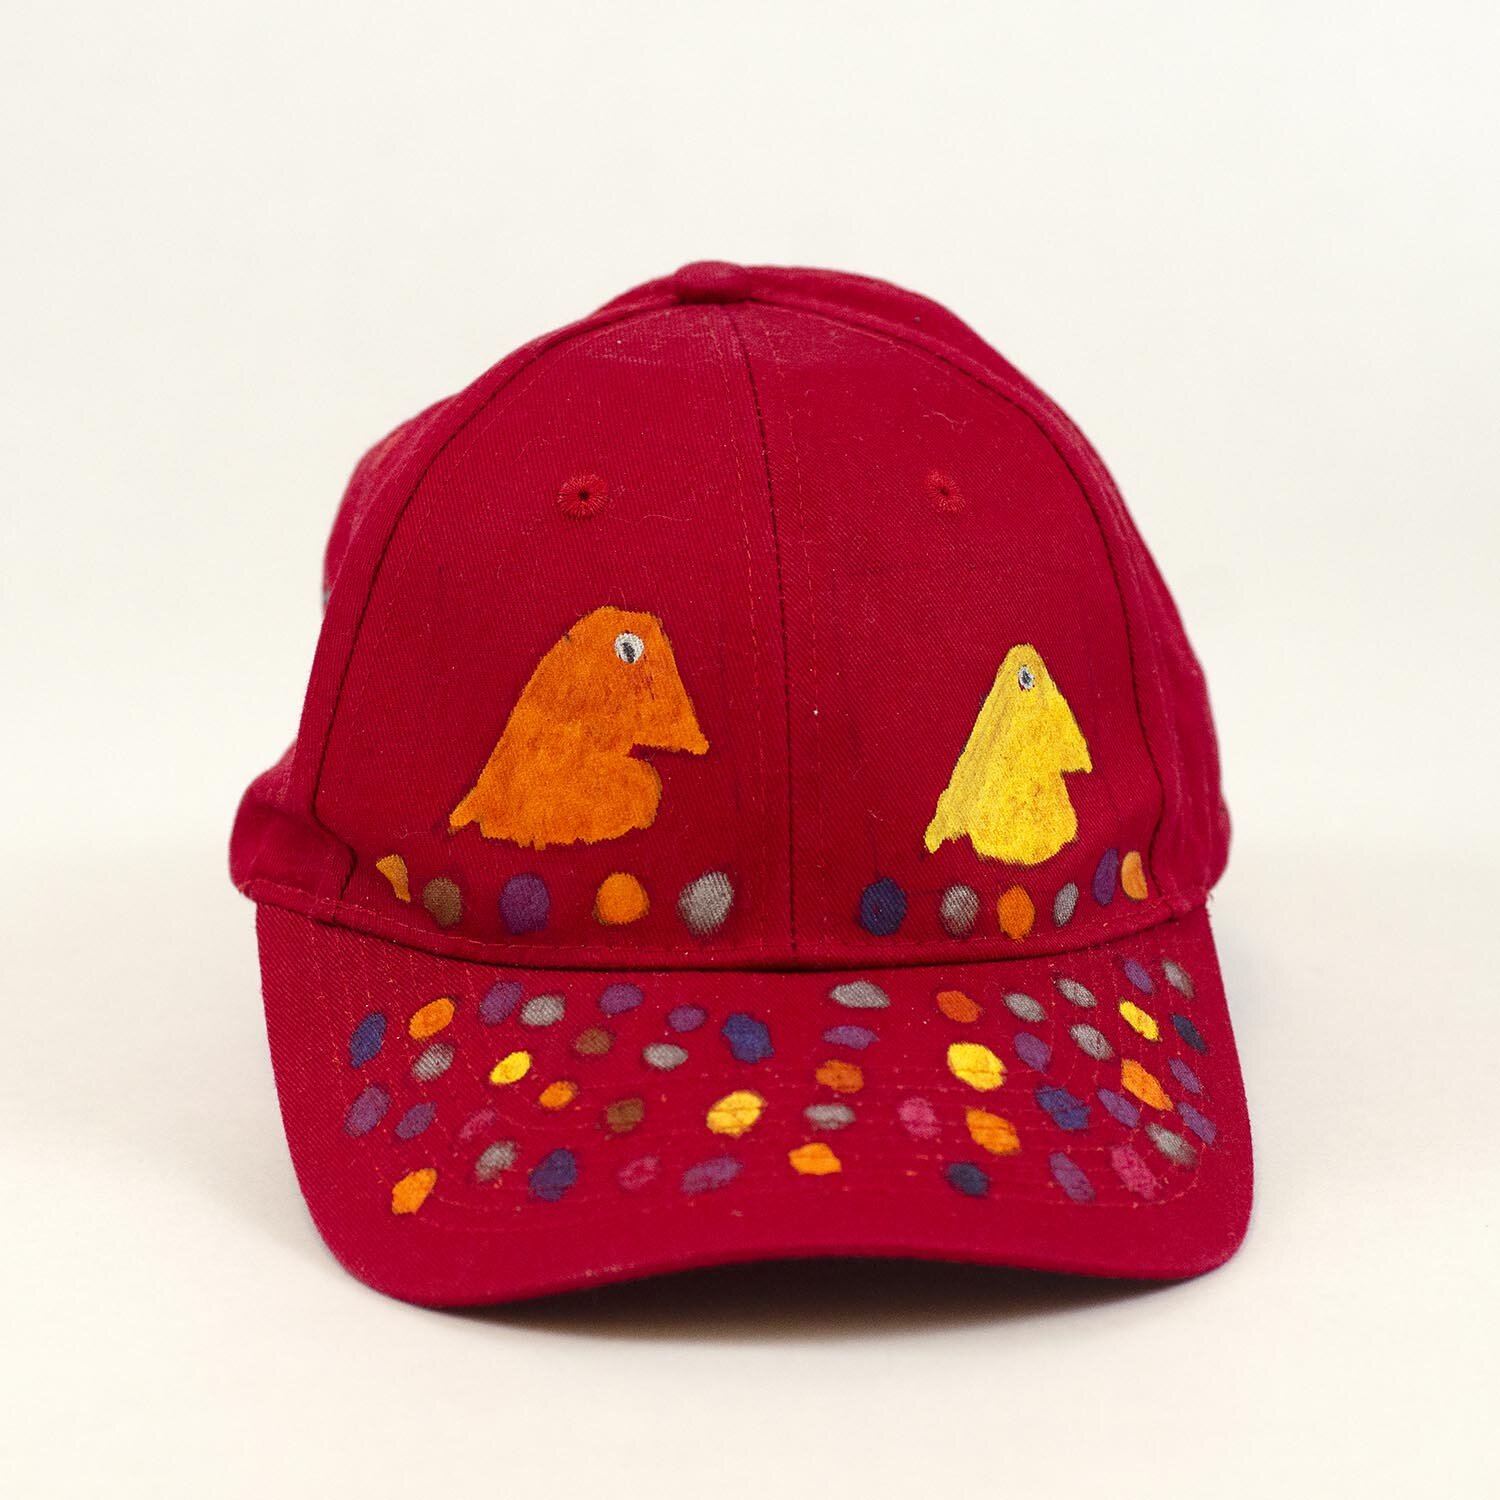 Red Baseball Cap with hand painted Puffins and Eggs by Mike Hinchcliff